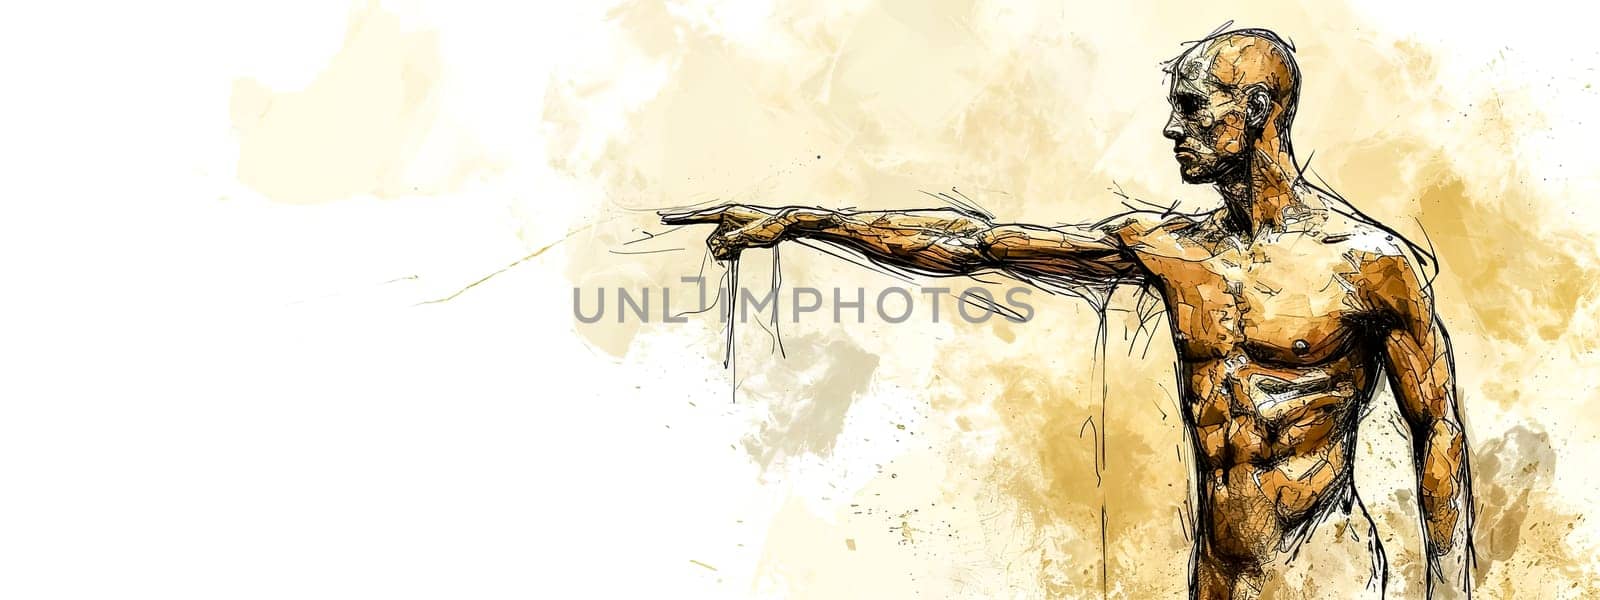 sketch of a male figure with extended arm, rendered in dynamic strokes and earth tones, embodying both strength and fragility. by Edophoto